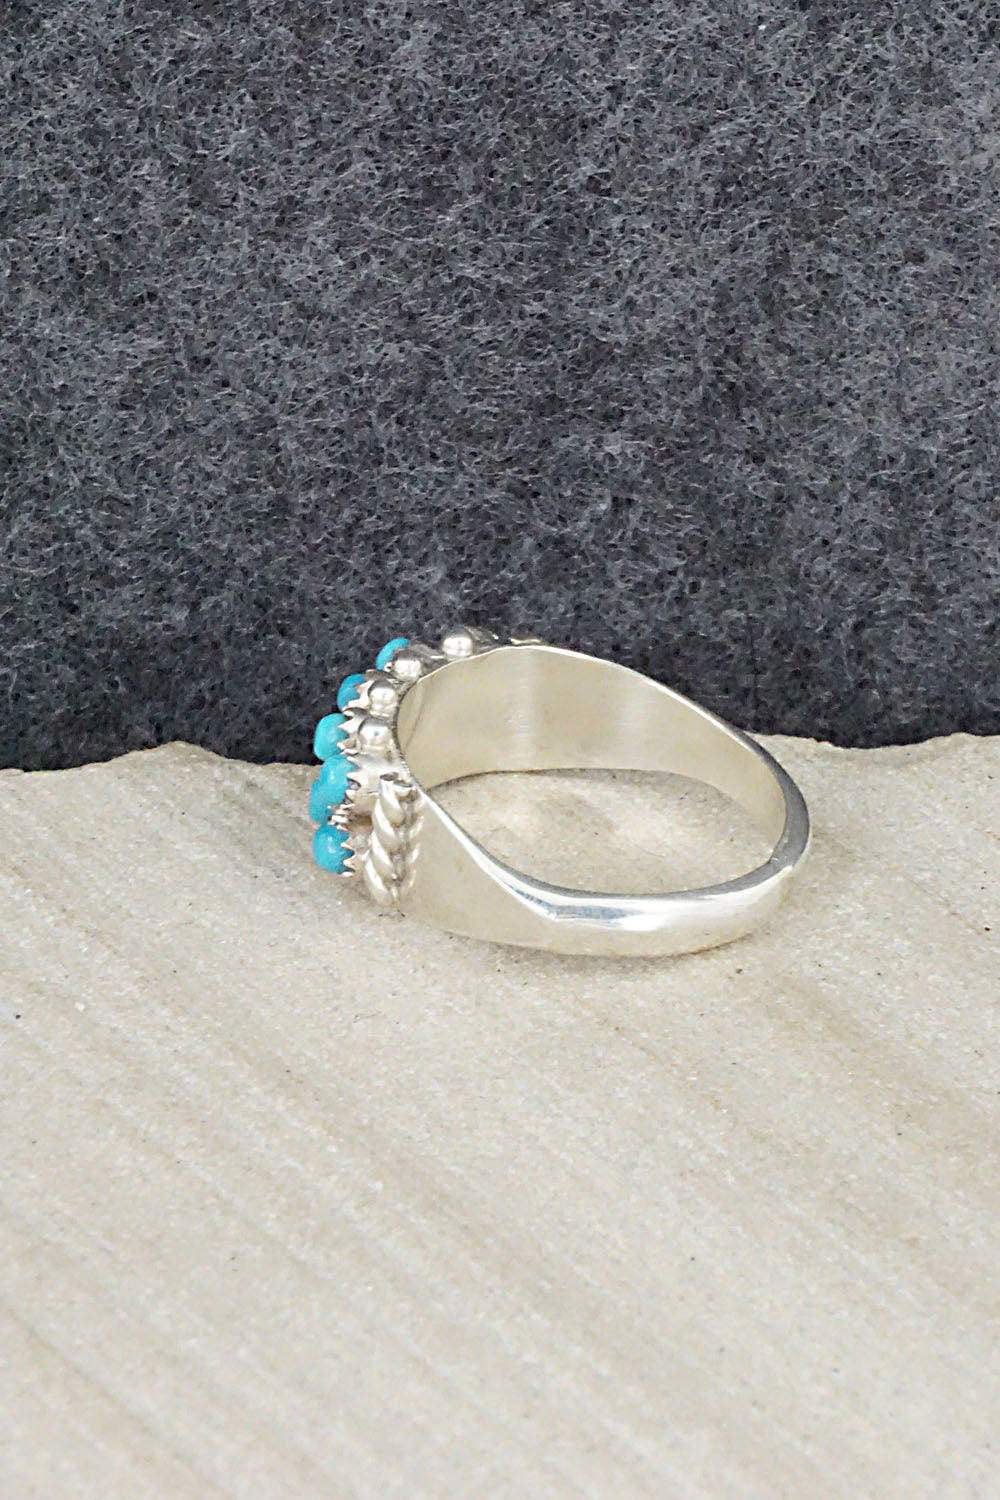 Turquoise & Sterling Silver Ring - April Haloo - Size 6.75